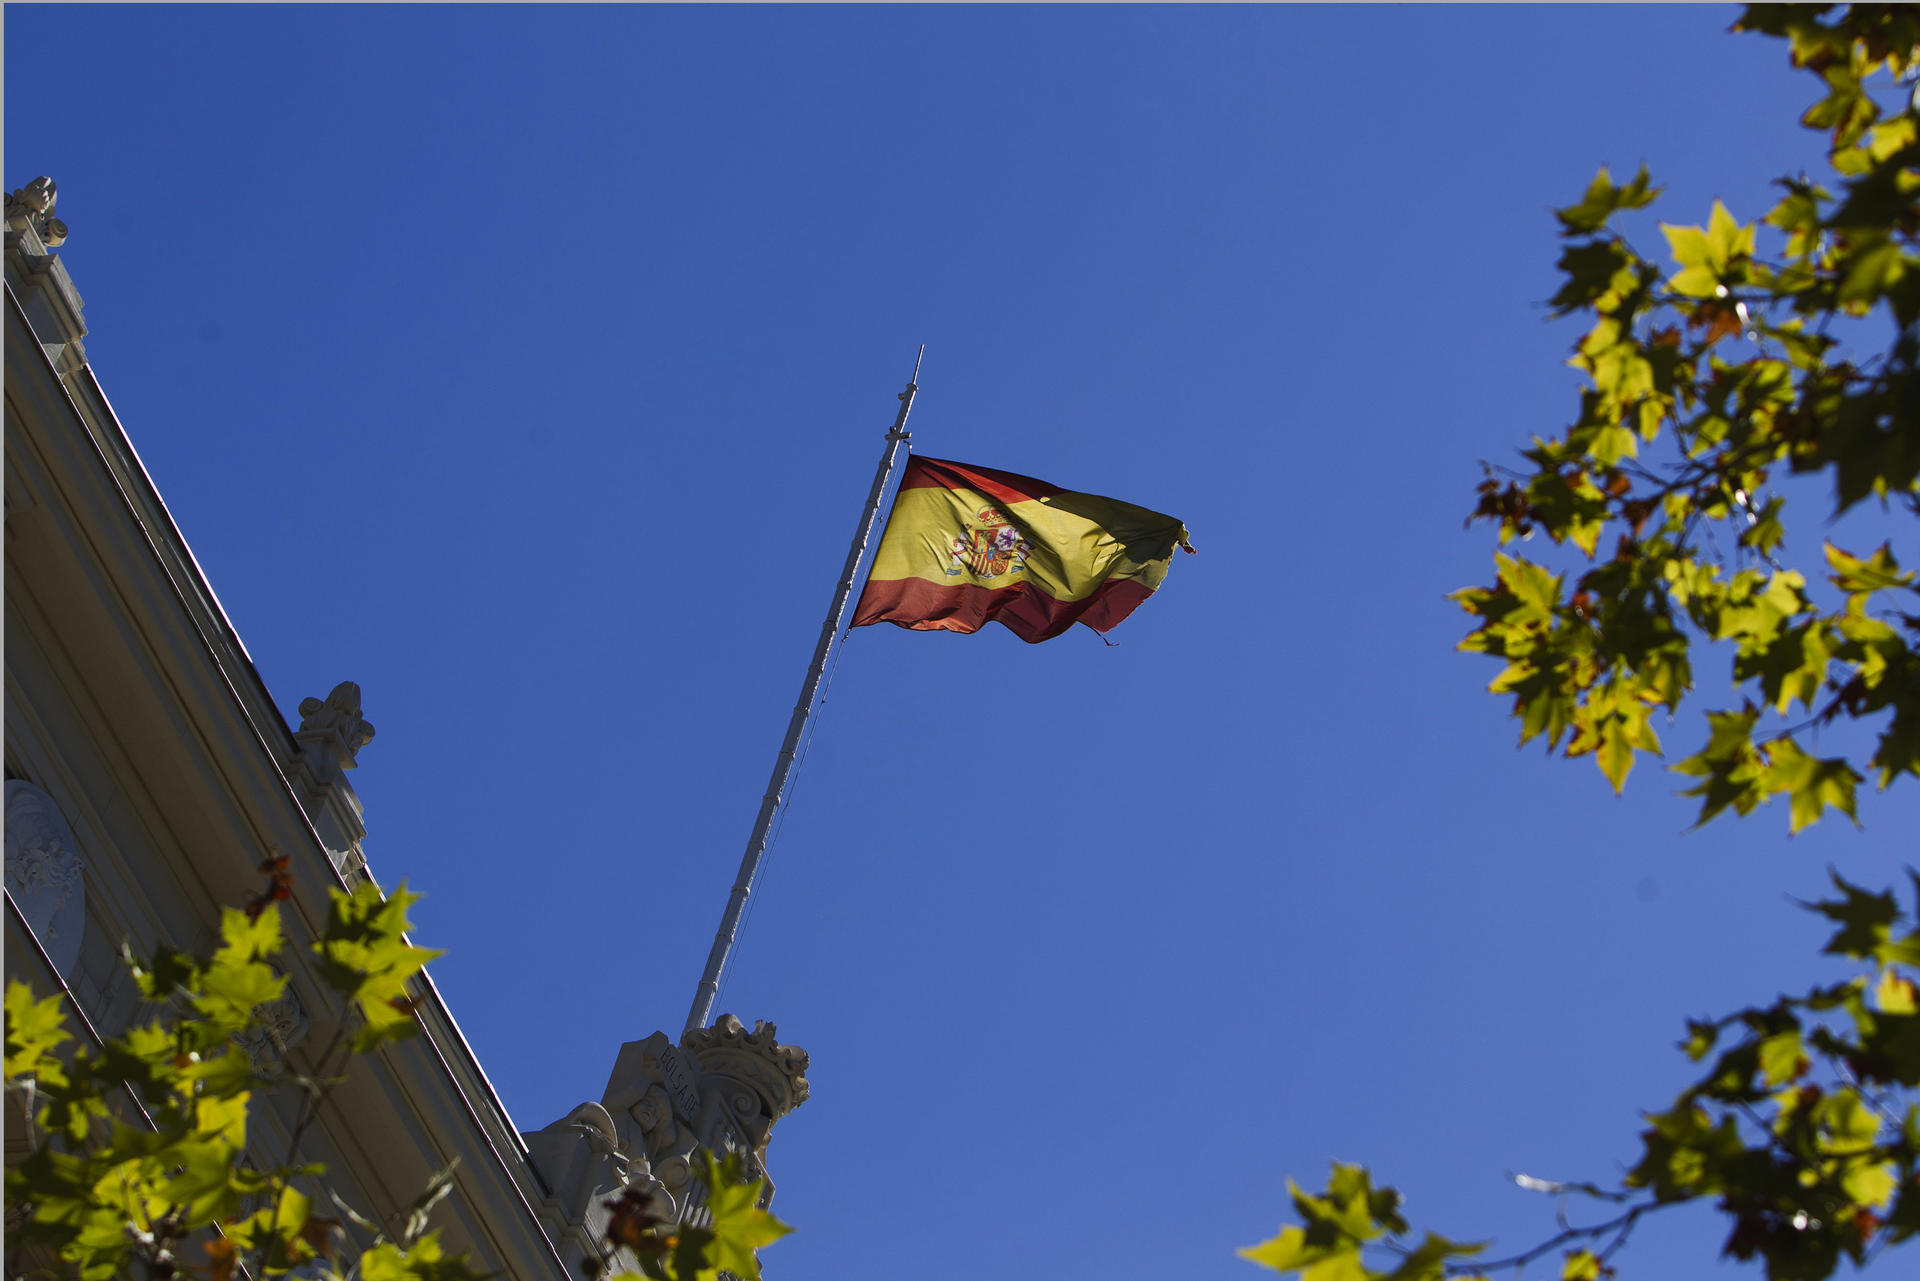 Spain has the ability and willingness to undertake the needed reforms and also benefits by starting from a more favourable public debt position, but it has to limit the expansion in its debt over the next few years as the economy works through a serious recession.Photo: Bloomberg